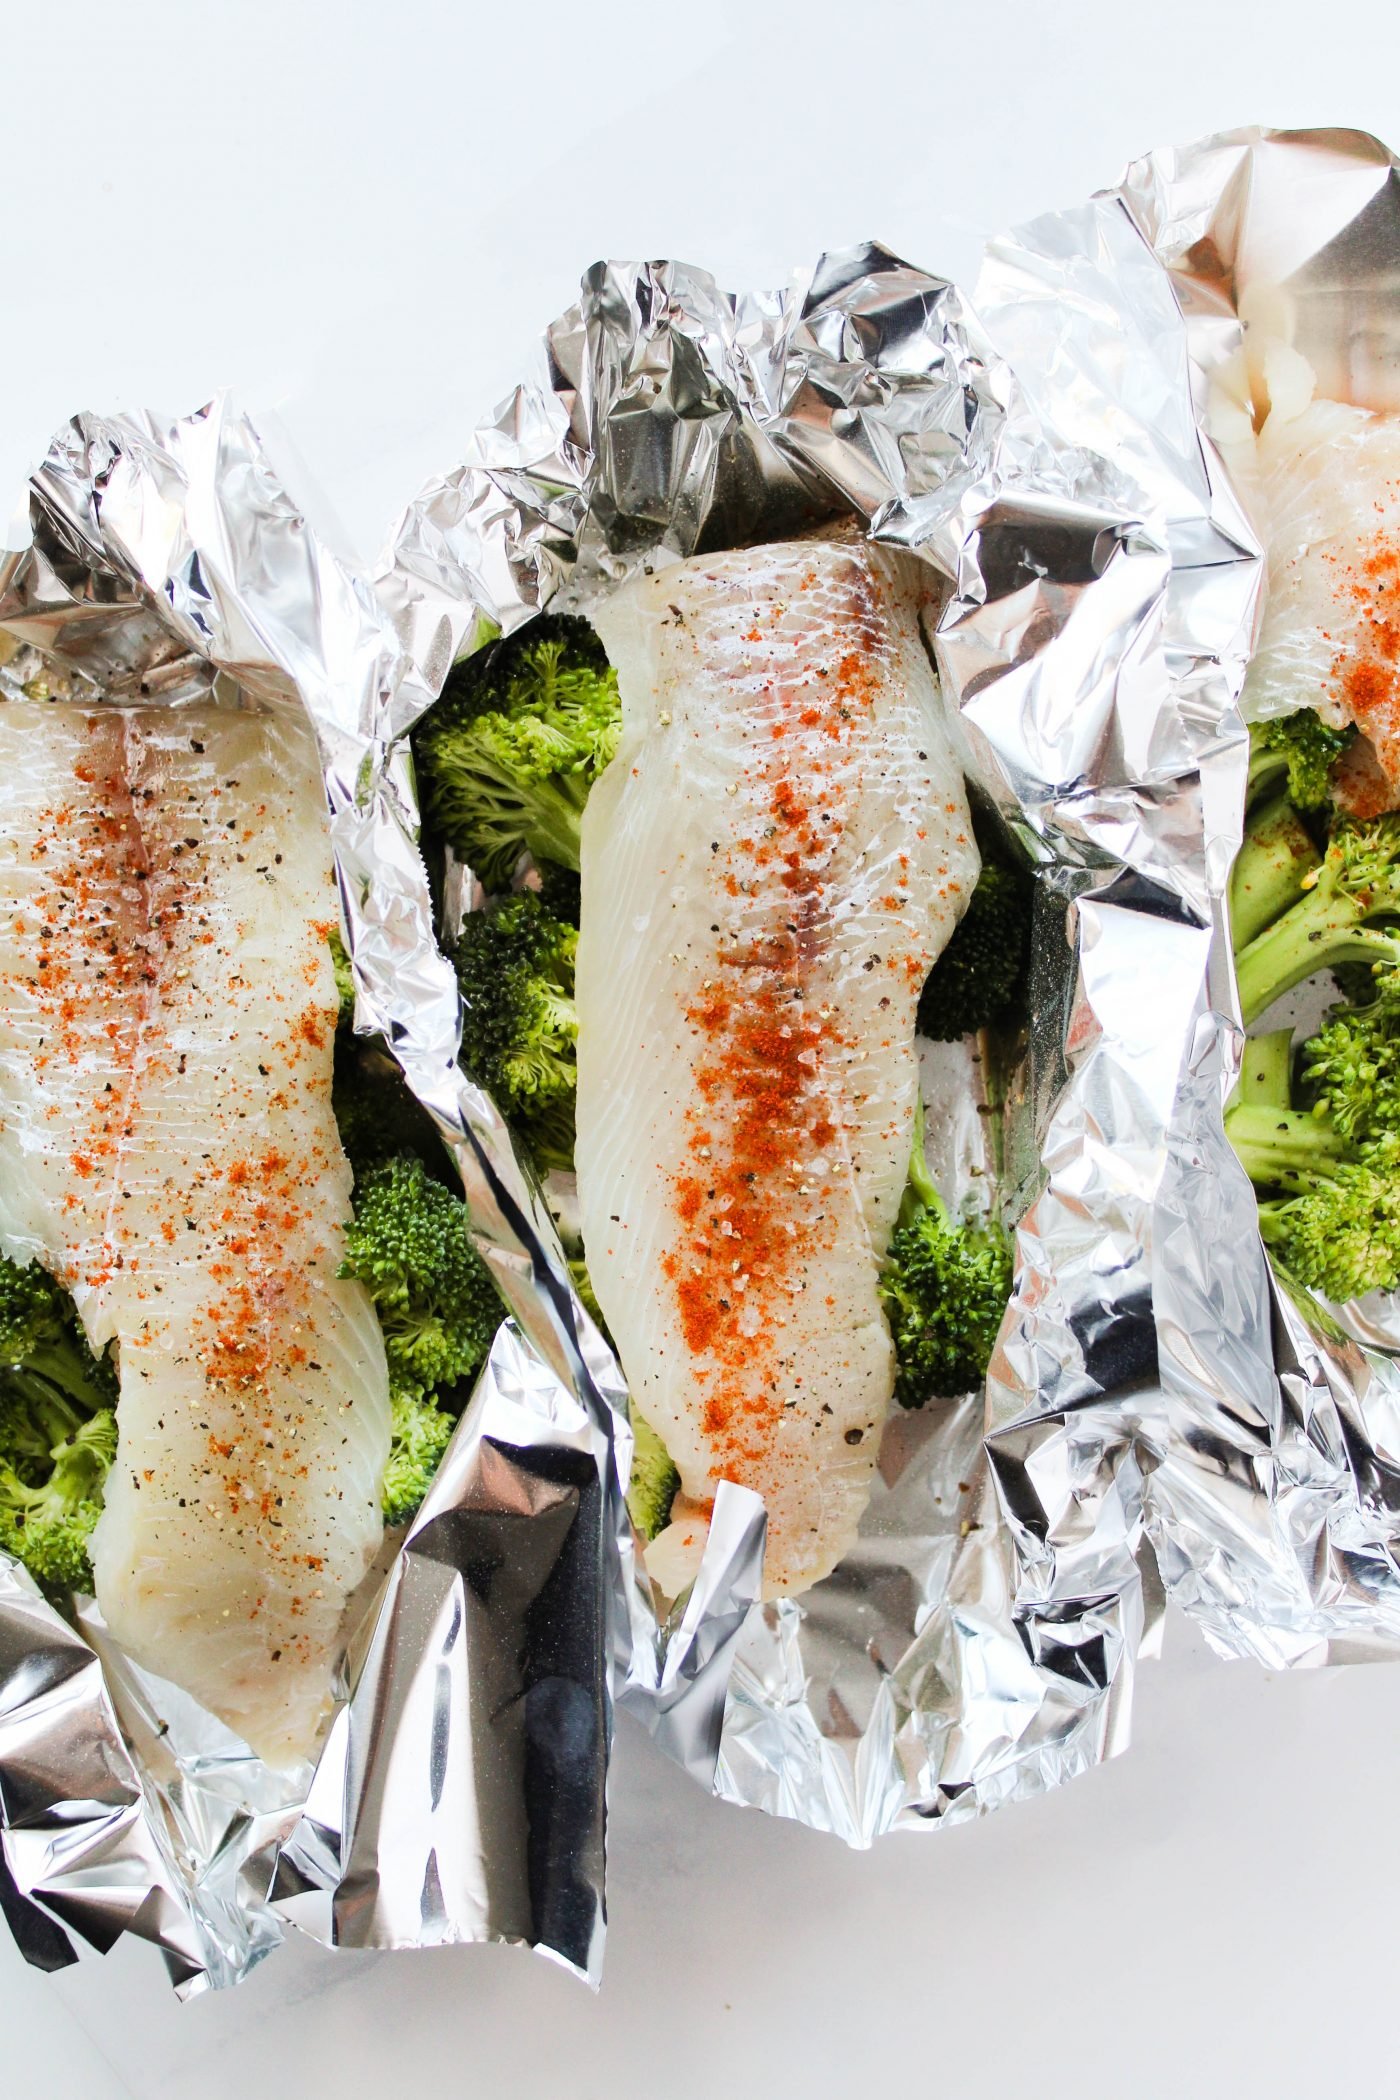 Broccoli and haddock in tin foil packets